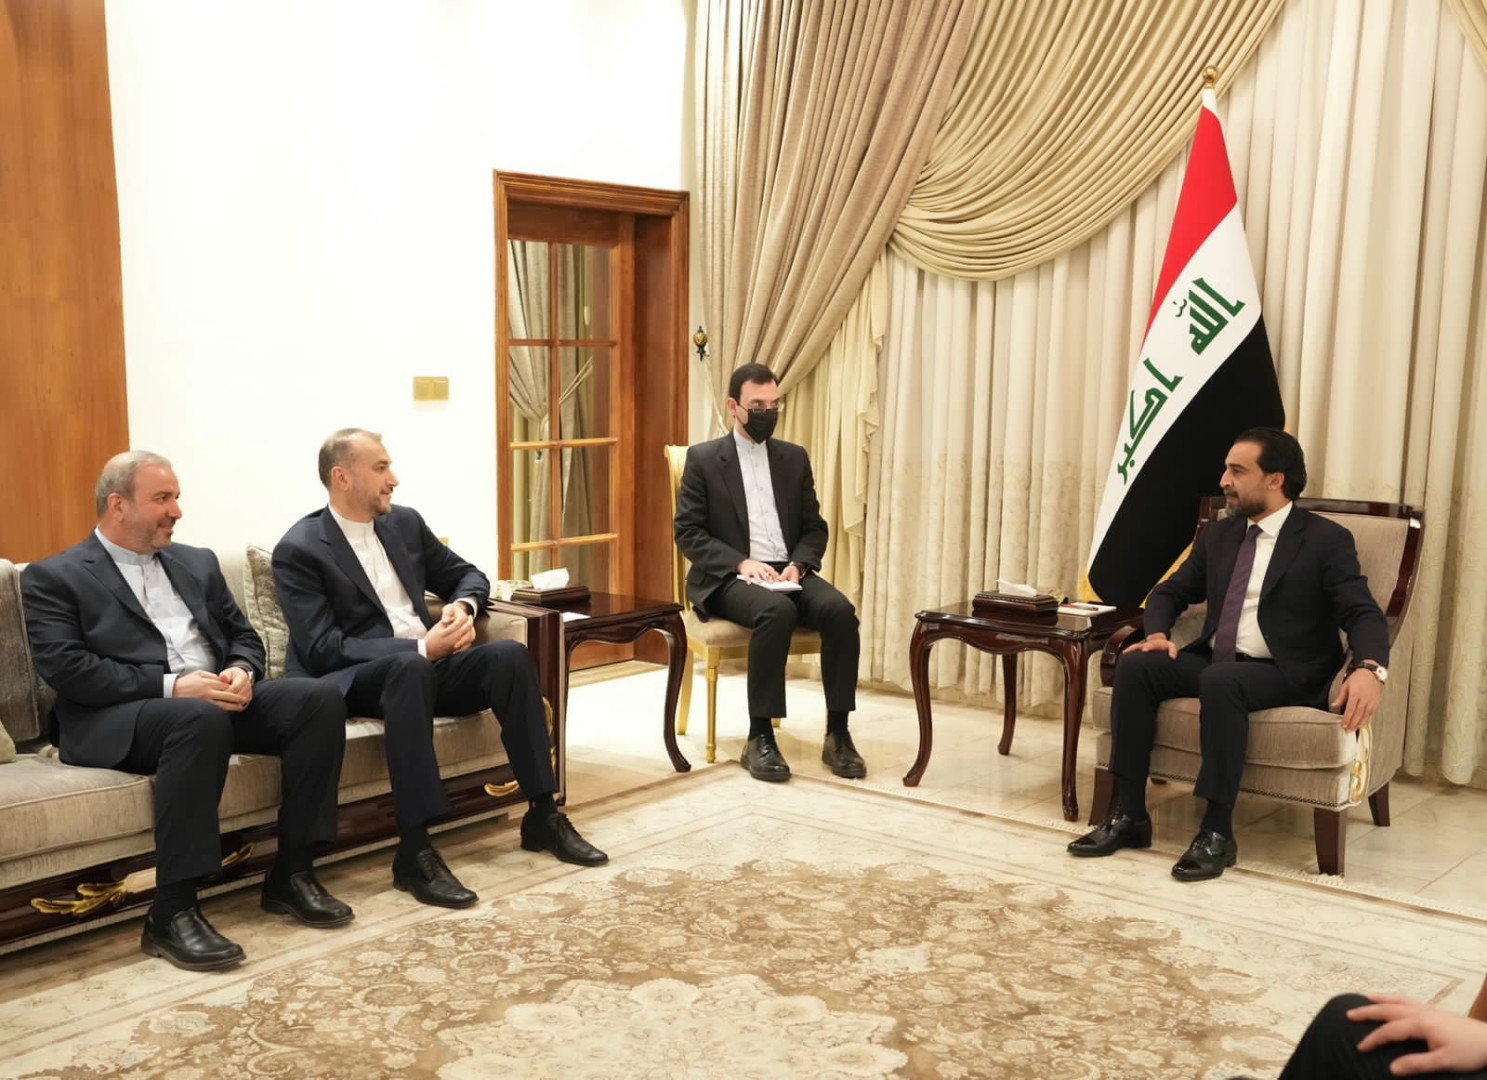 Amir-Abdollahian: Iran supports everything that contributes to Iraq's development and stability